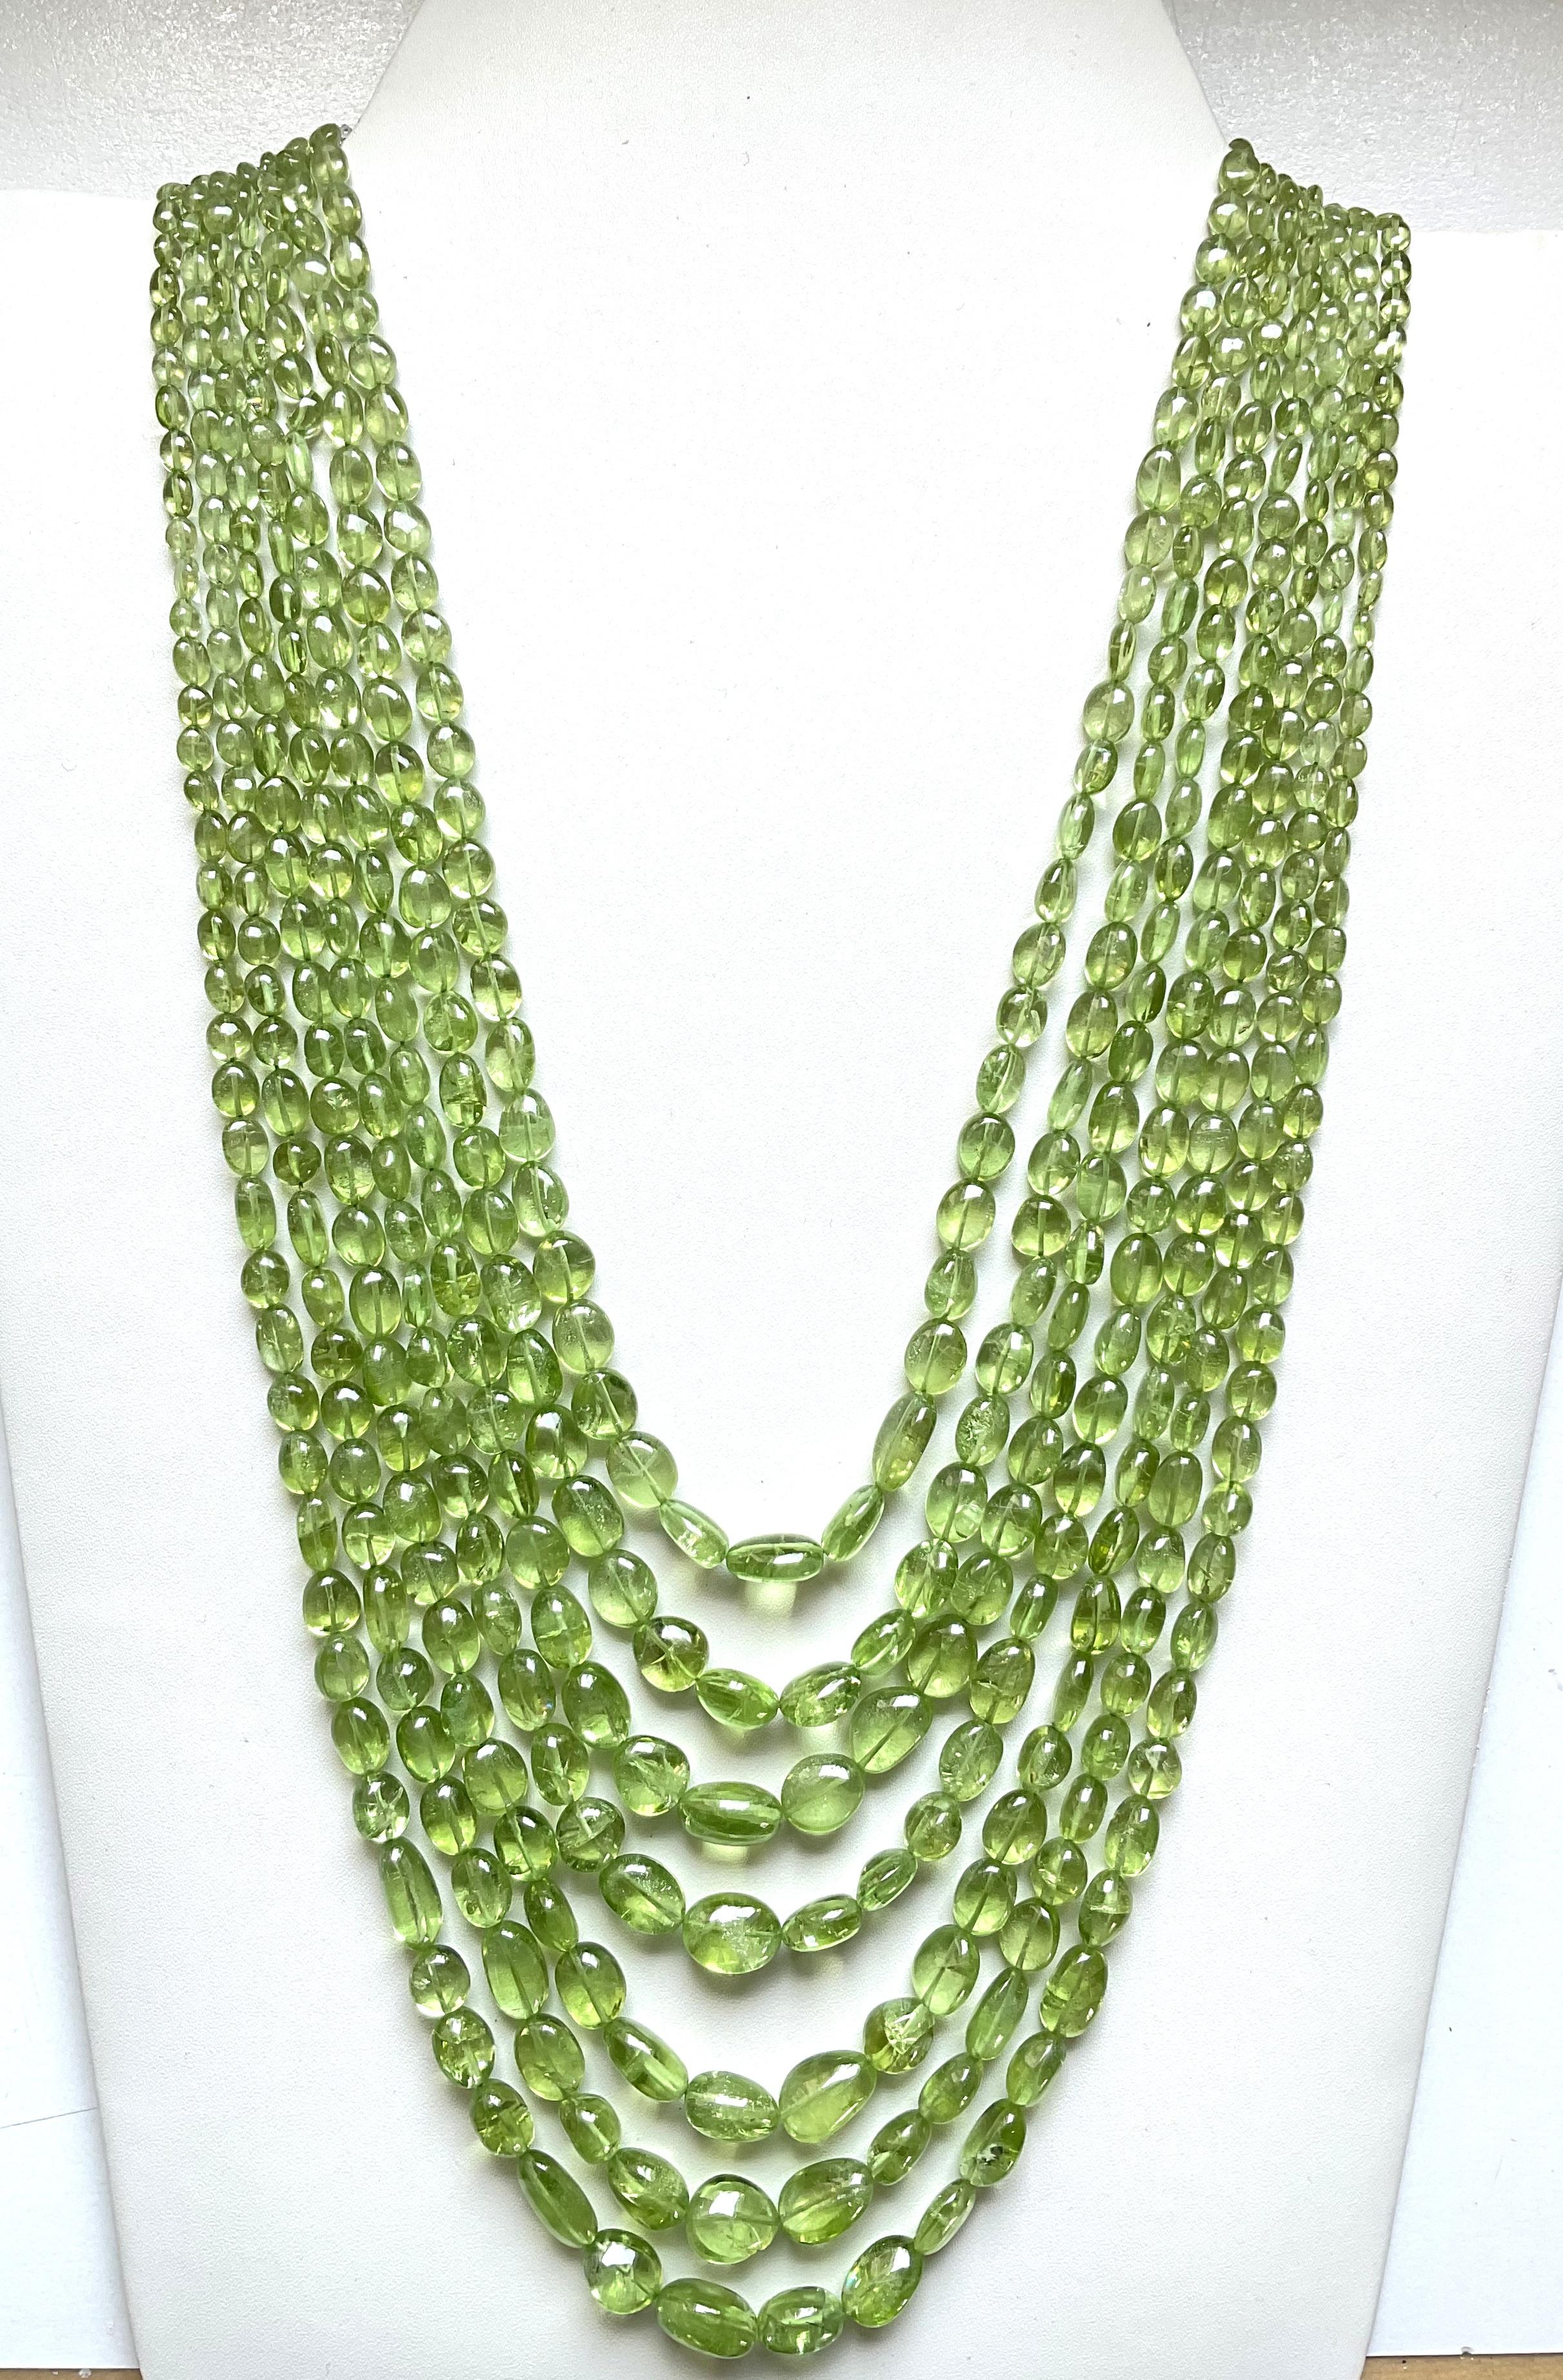 1055.55 carats apple green peridot top quality plain tumbled natural necklace gem

Gemstone - Peridot
Size : 5x7 To 12x13
Weight : 1055.55 Carats
Strand - 7 Line